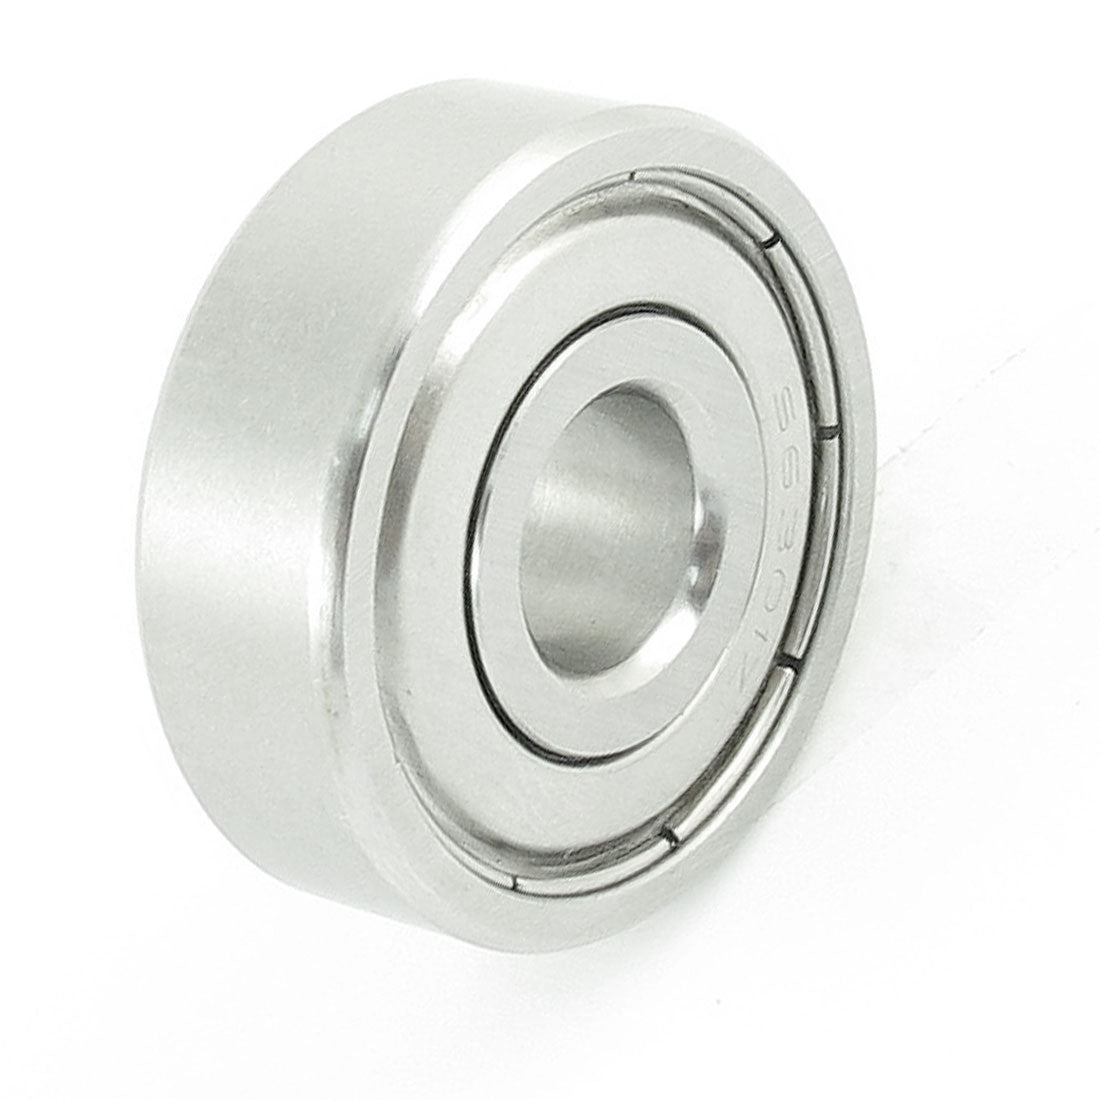 uxcell Uxcell Stainless Steel 37mm x 12mm x 12mm Sealed Deep Groove Ball Bearing